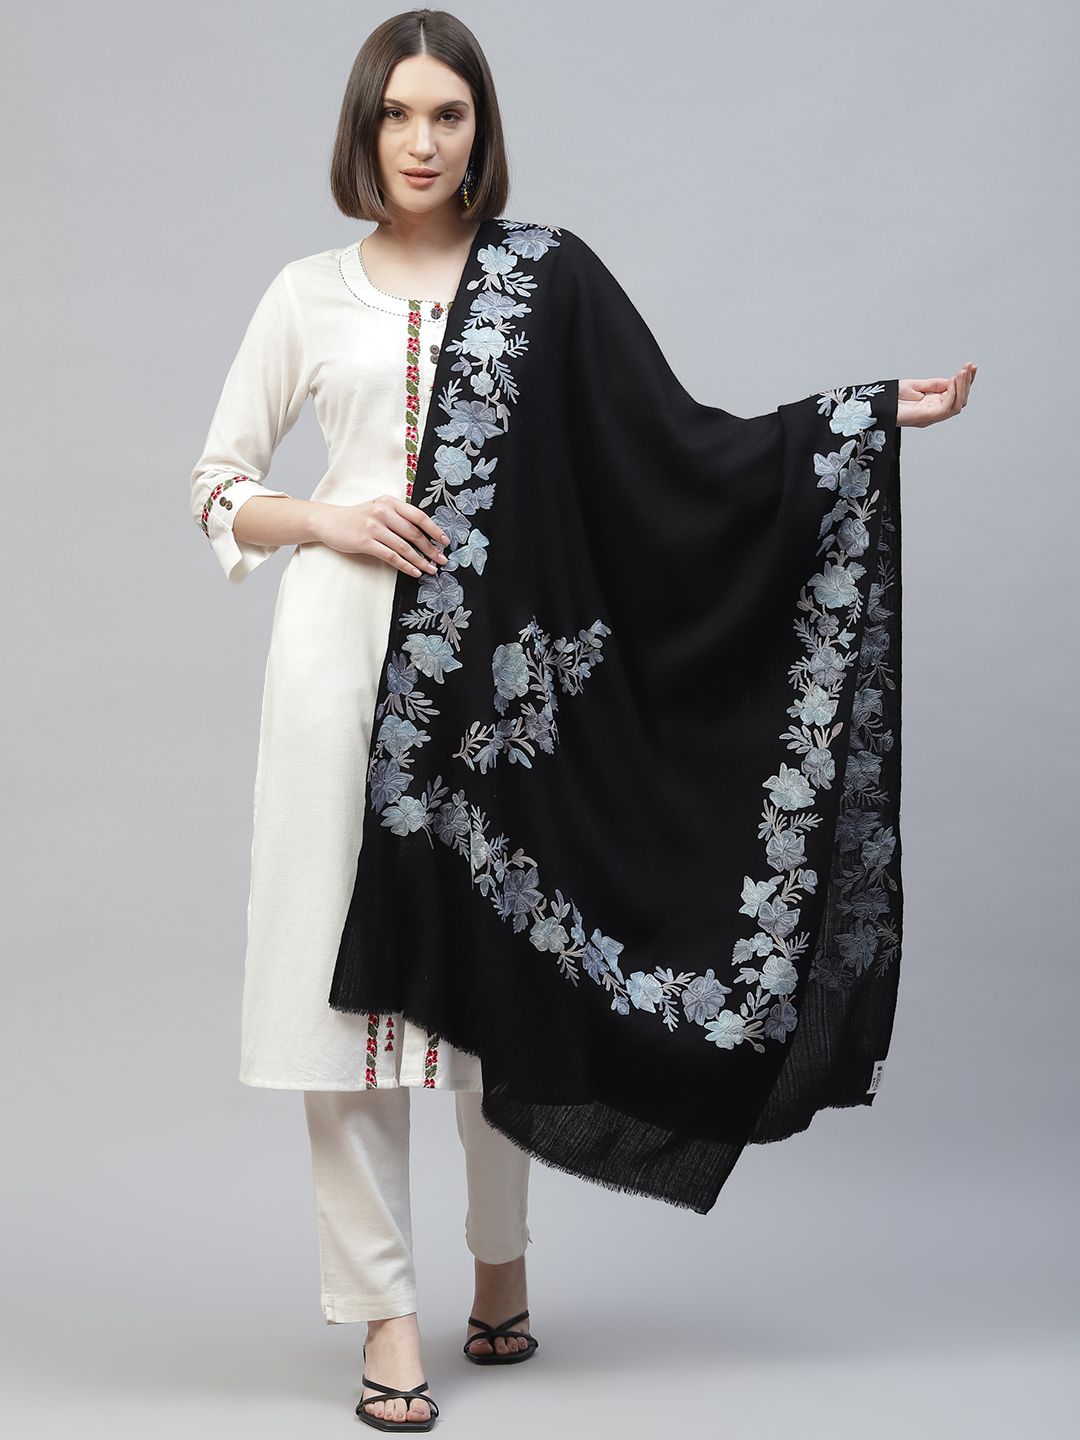 MODARTA Black Woolen Shawl with Floral Embroidery Price in India